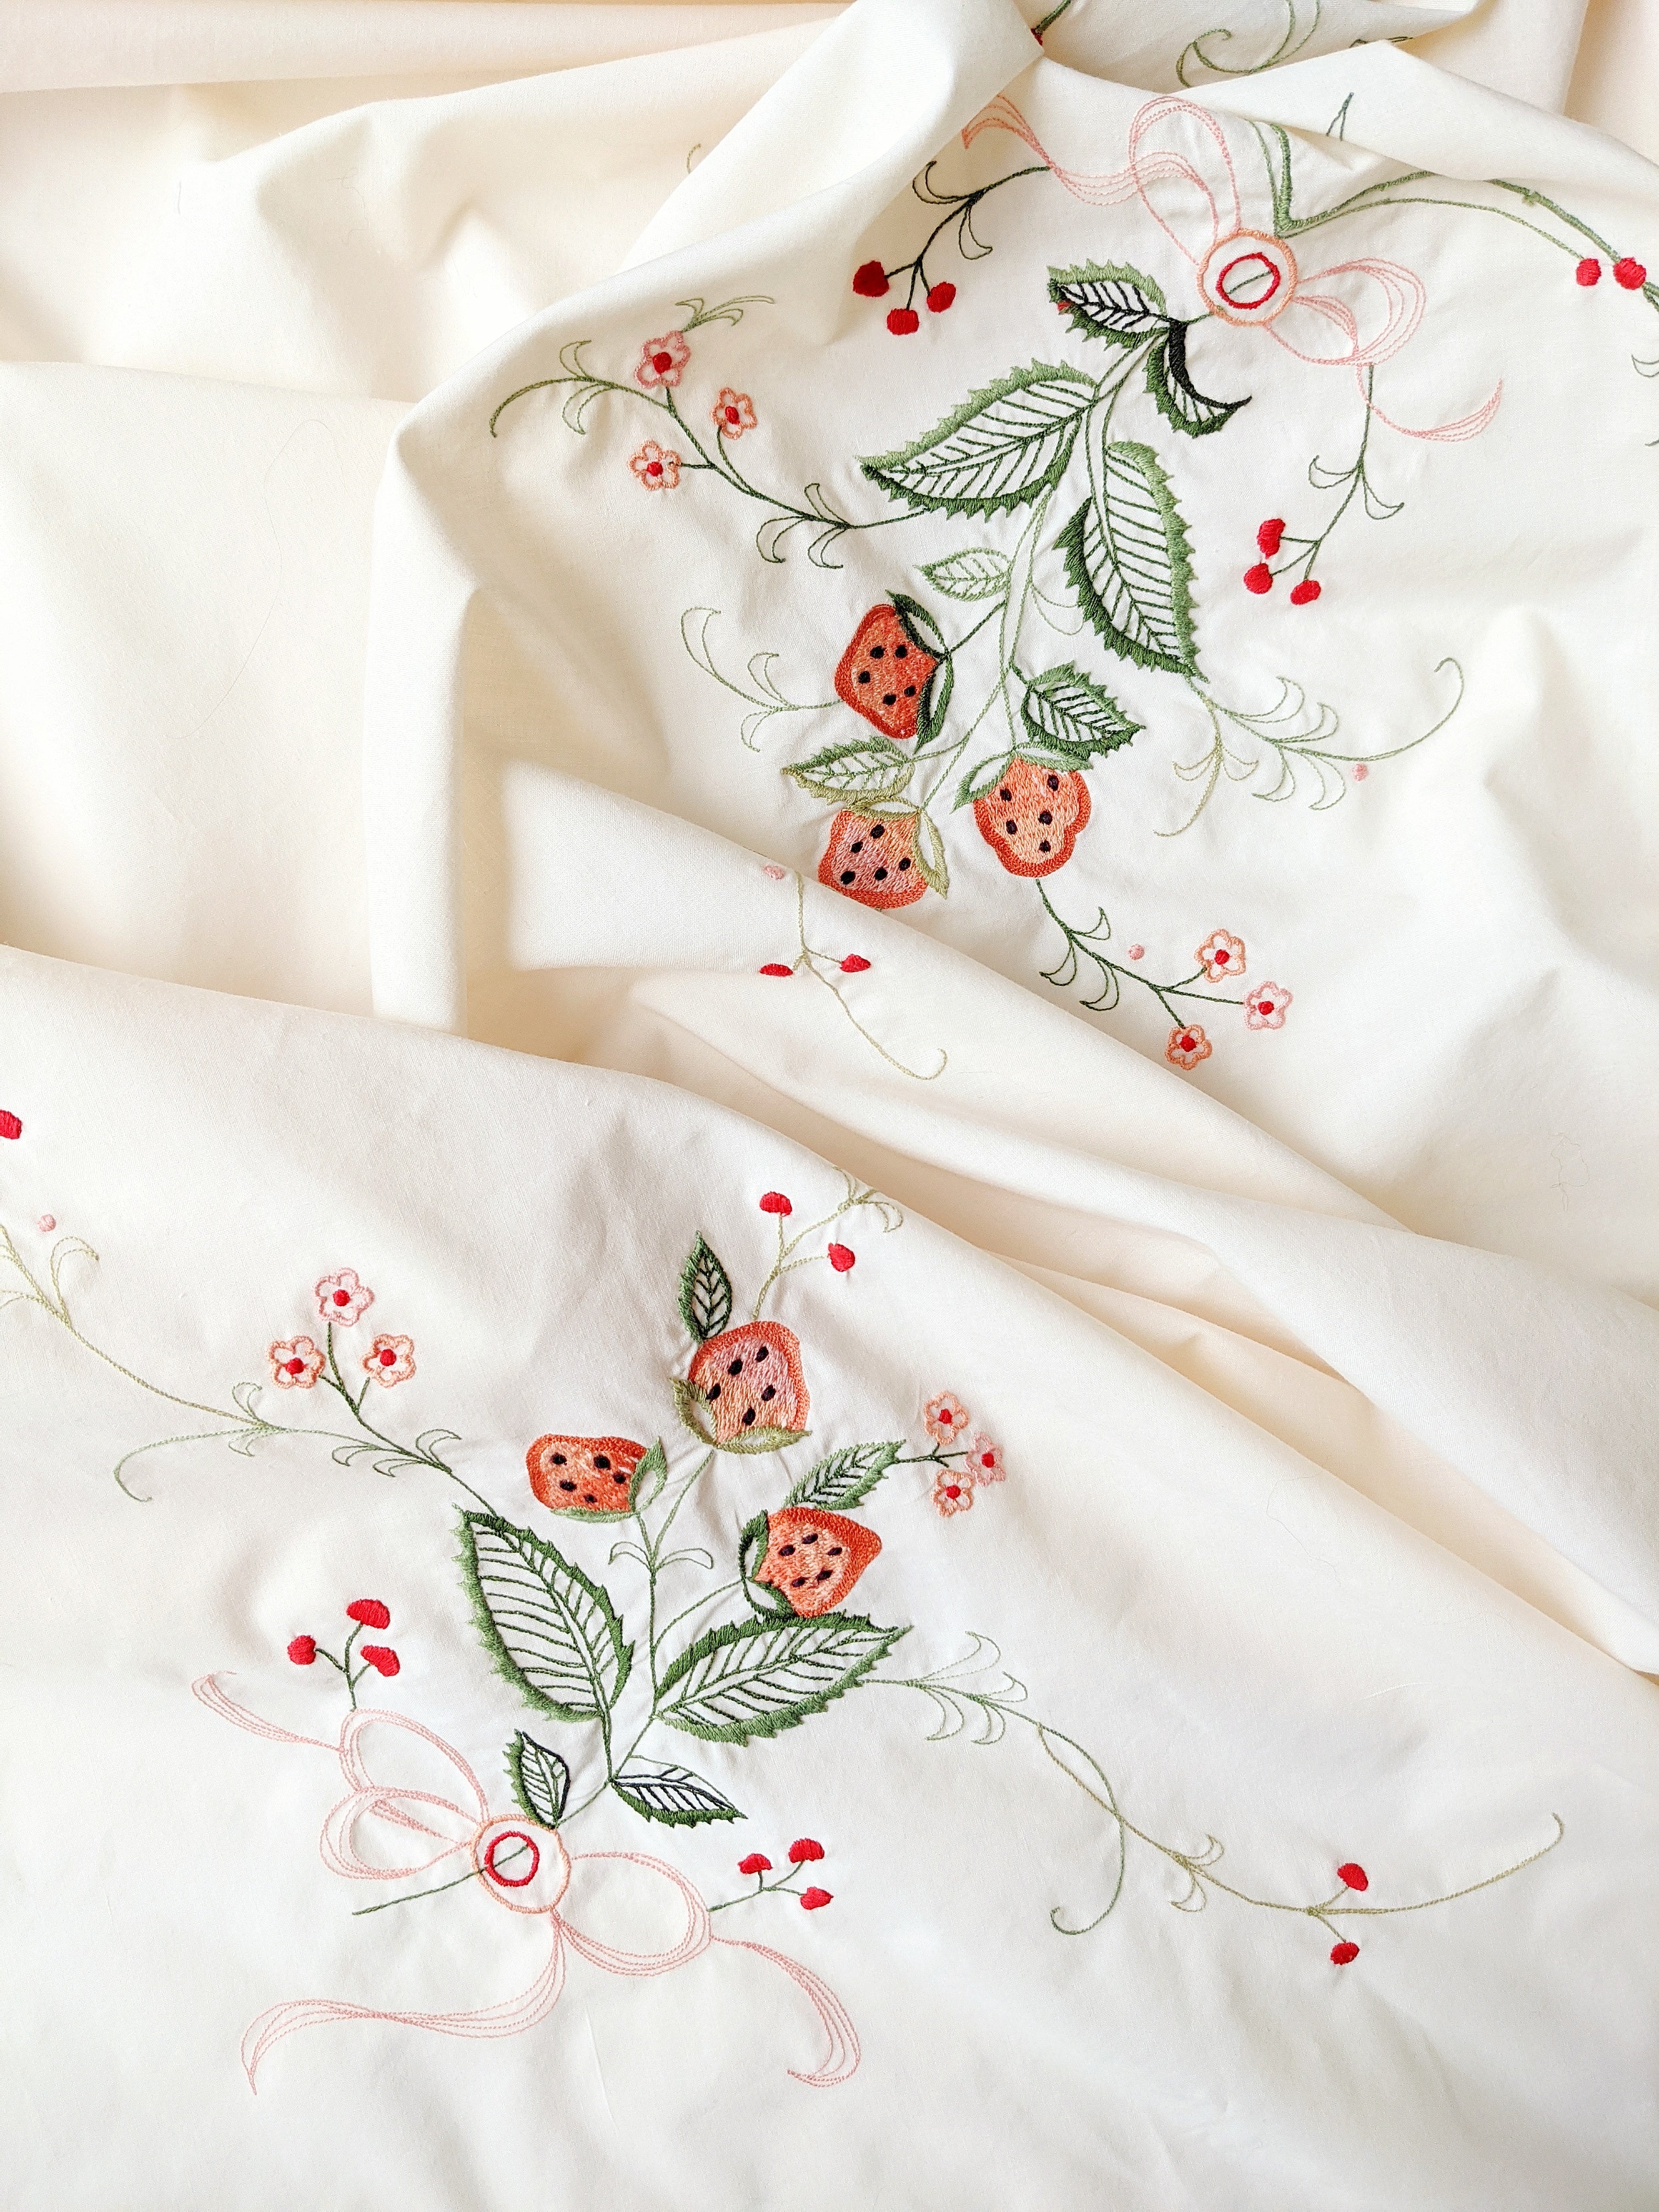 "June" Made-to-Order Embroidered Outfit